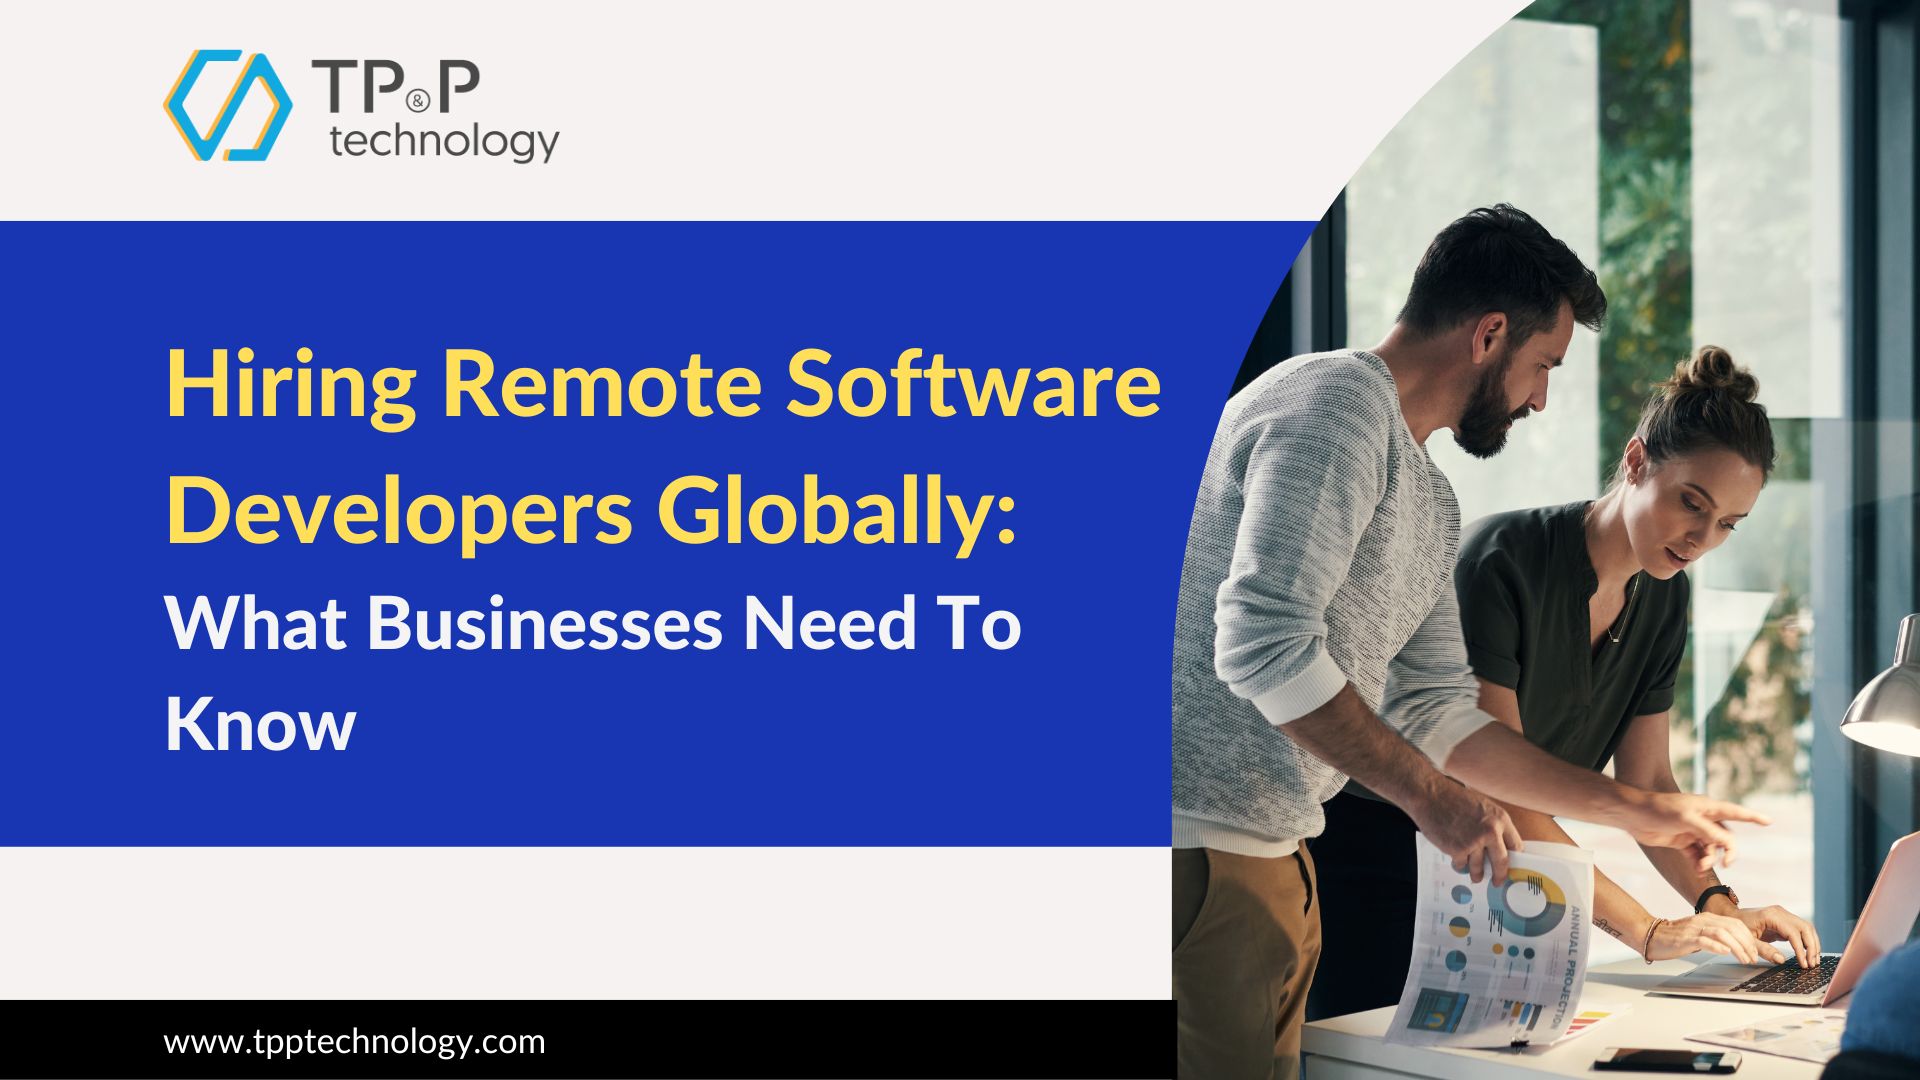 Hiring Remote Software Developers Globally: What Businesses Need To Know